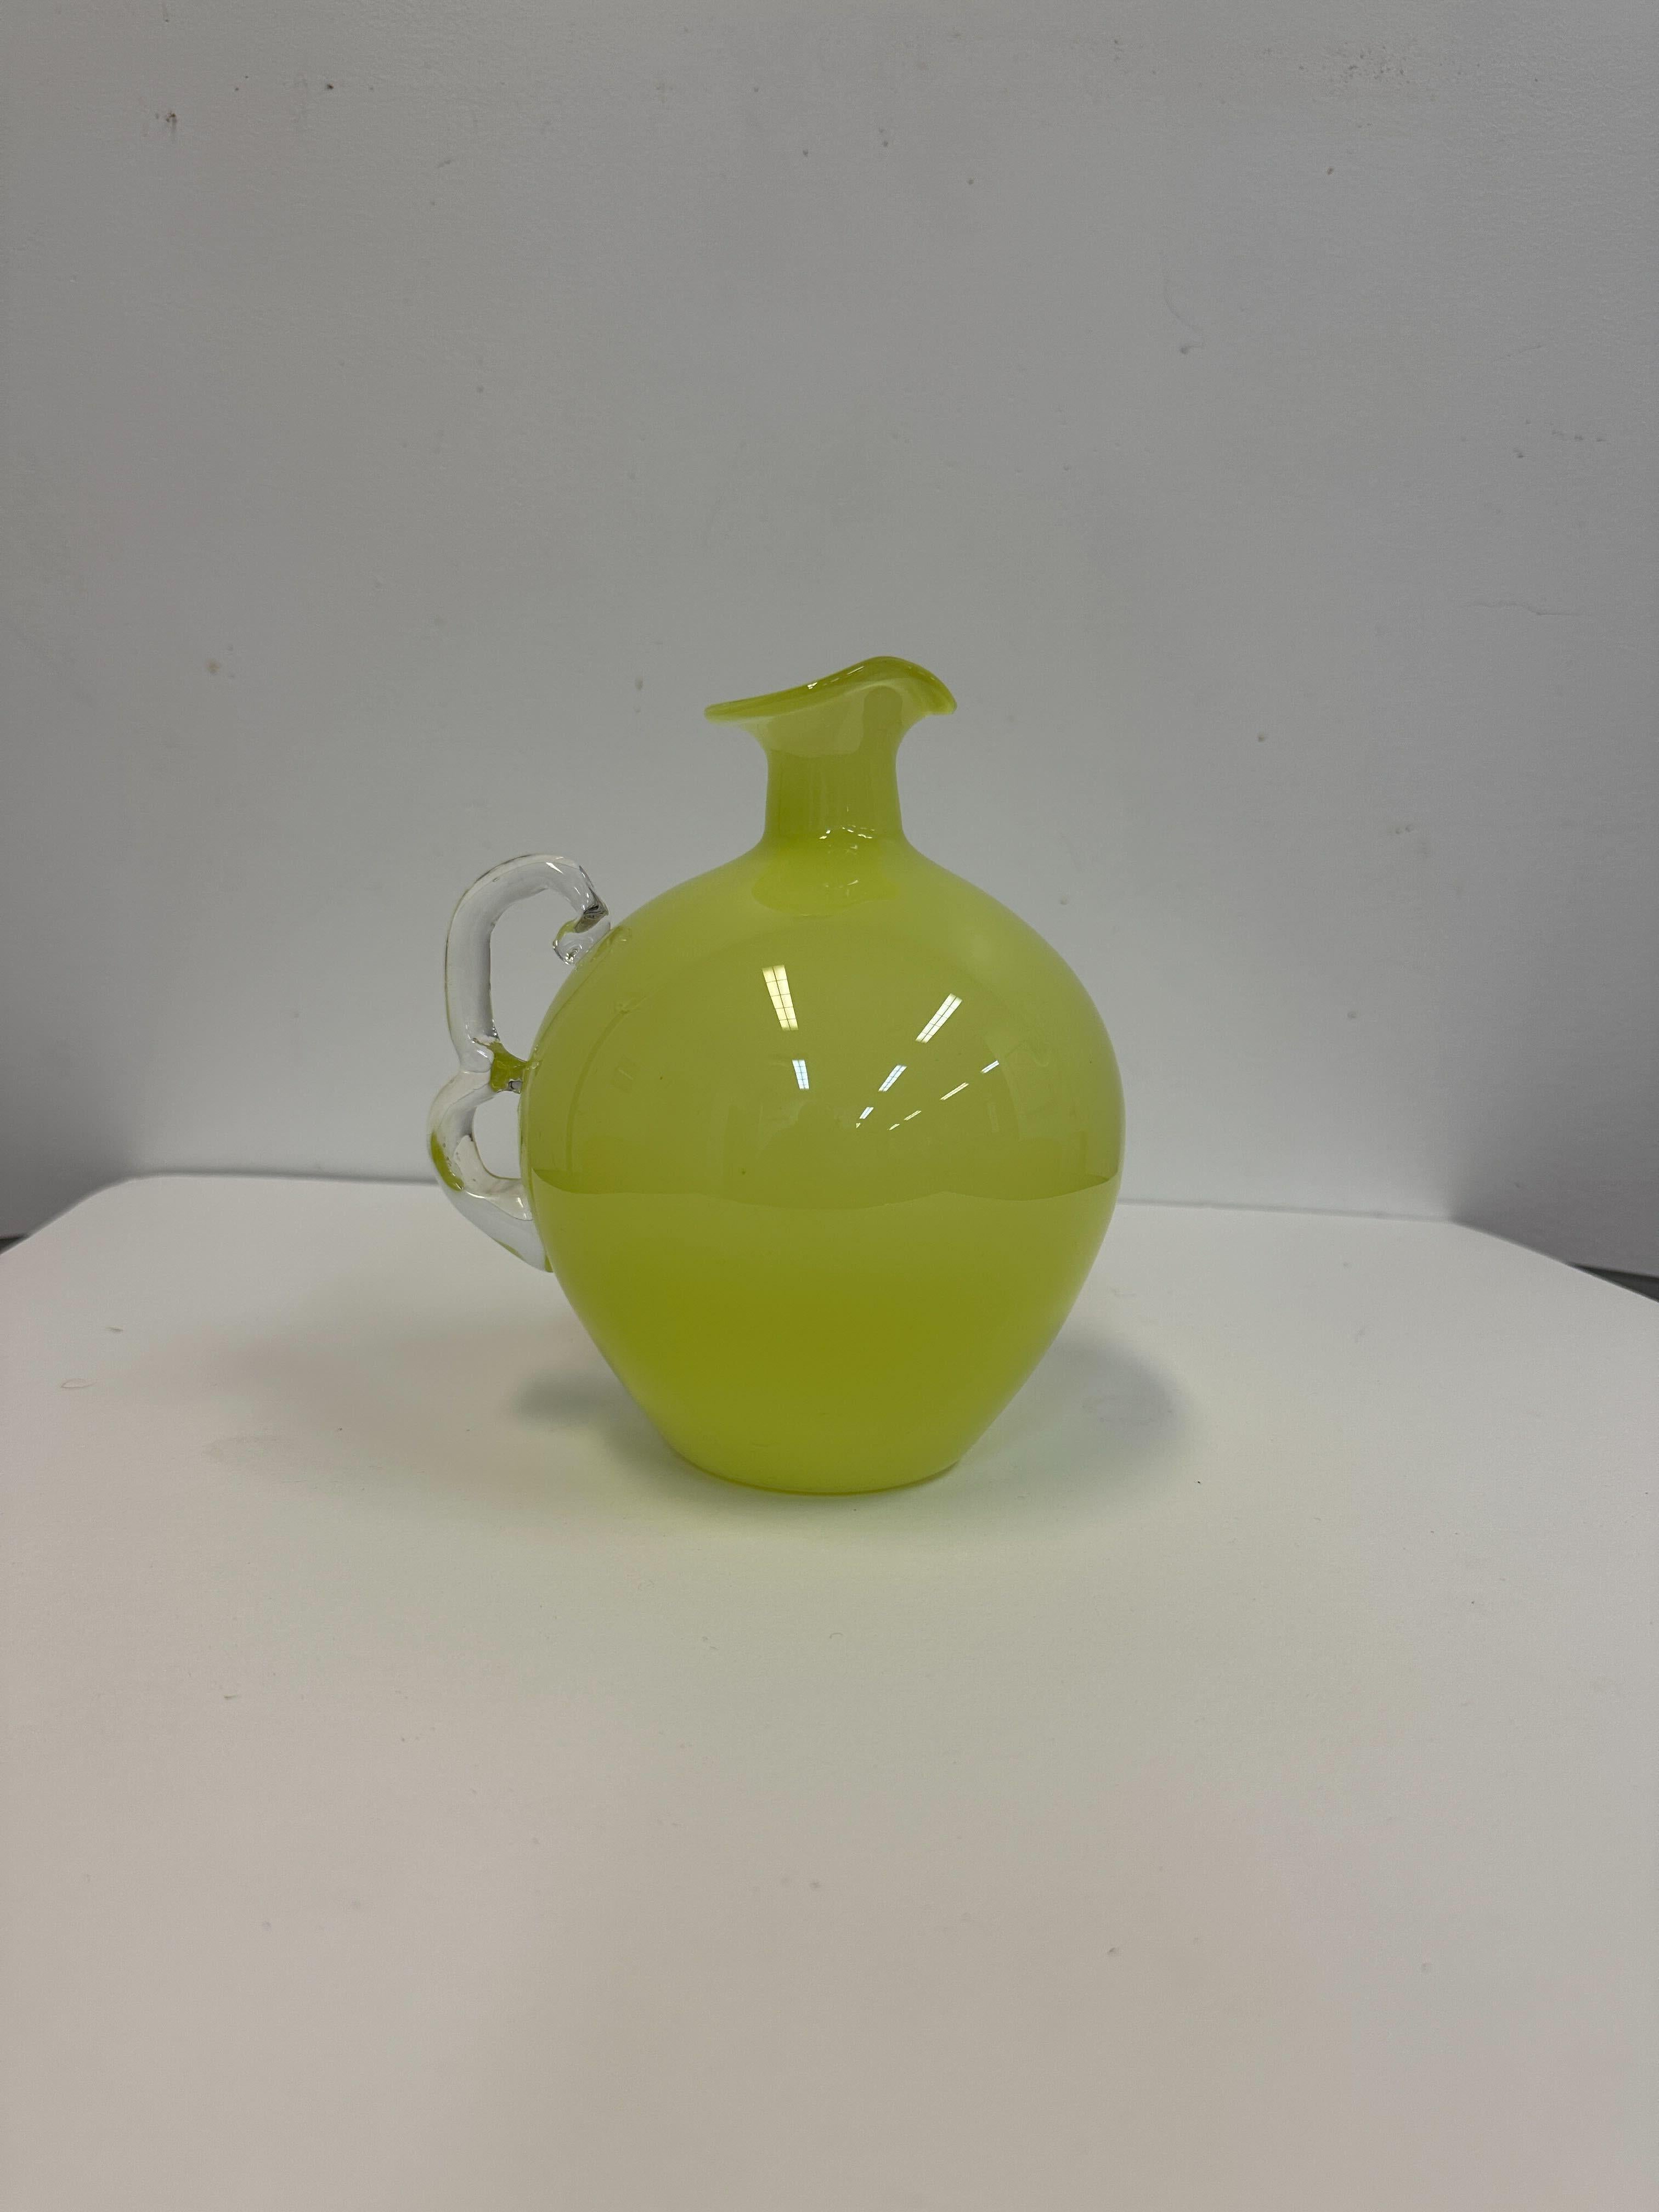 Handblown cased glass pitcher with twisted handle made in the mid-1950s by the Italian firm Empoli. Irresistibly chic olive green glass encased in clear glass set off by a clear classical twisted Murano glass handle. A fantastic mingling of